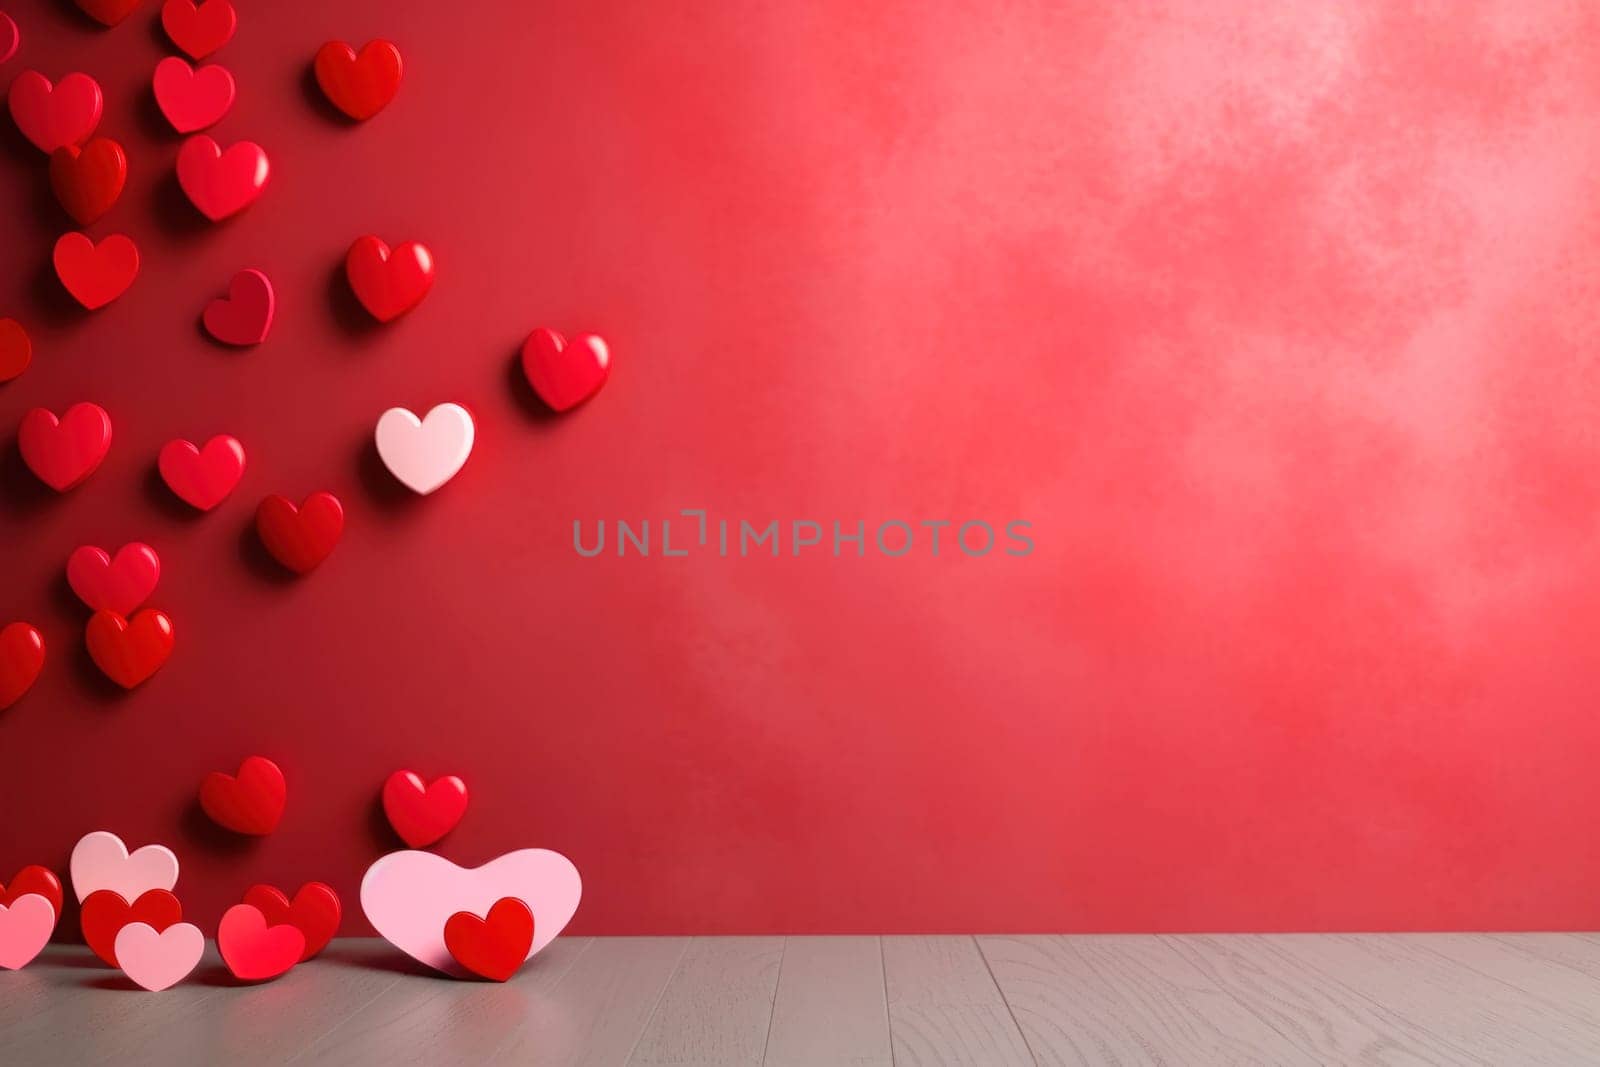 Red background with hearts for Valentine's Day or wedding.